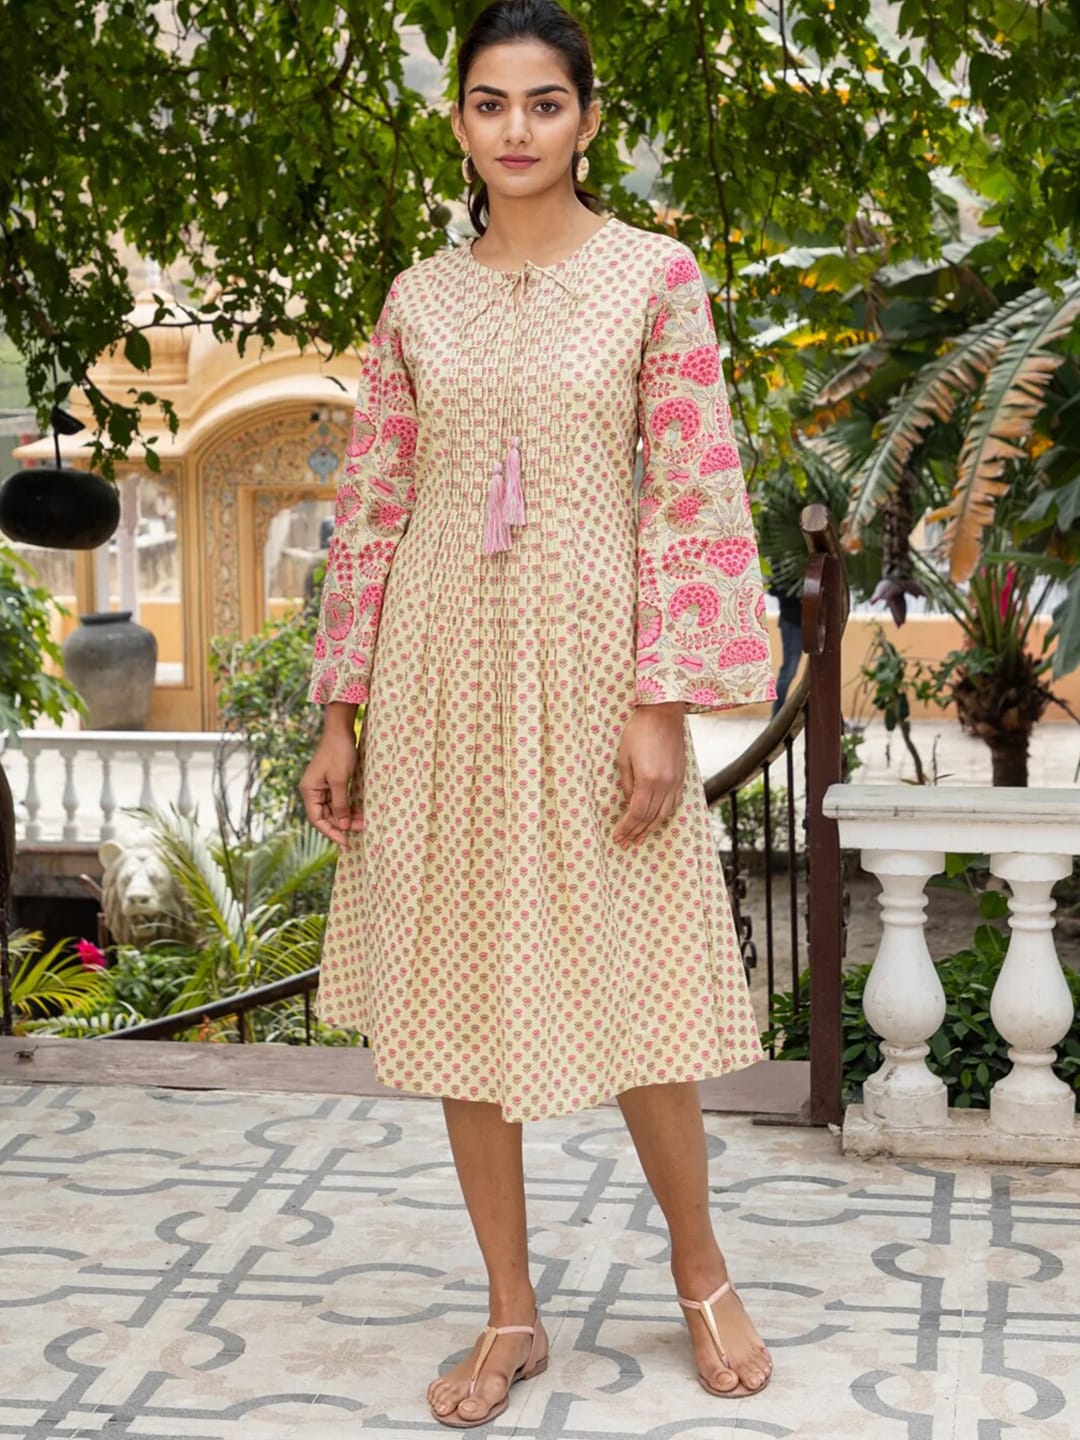 Ambraee Mustard Yellow Floral A-Line Dress Price in India